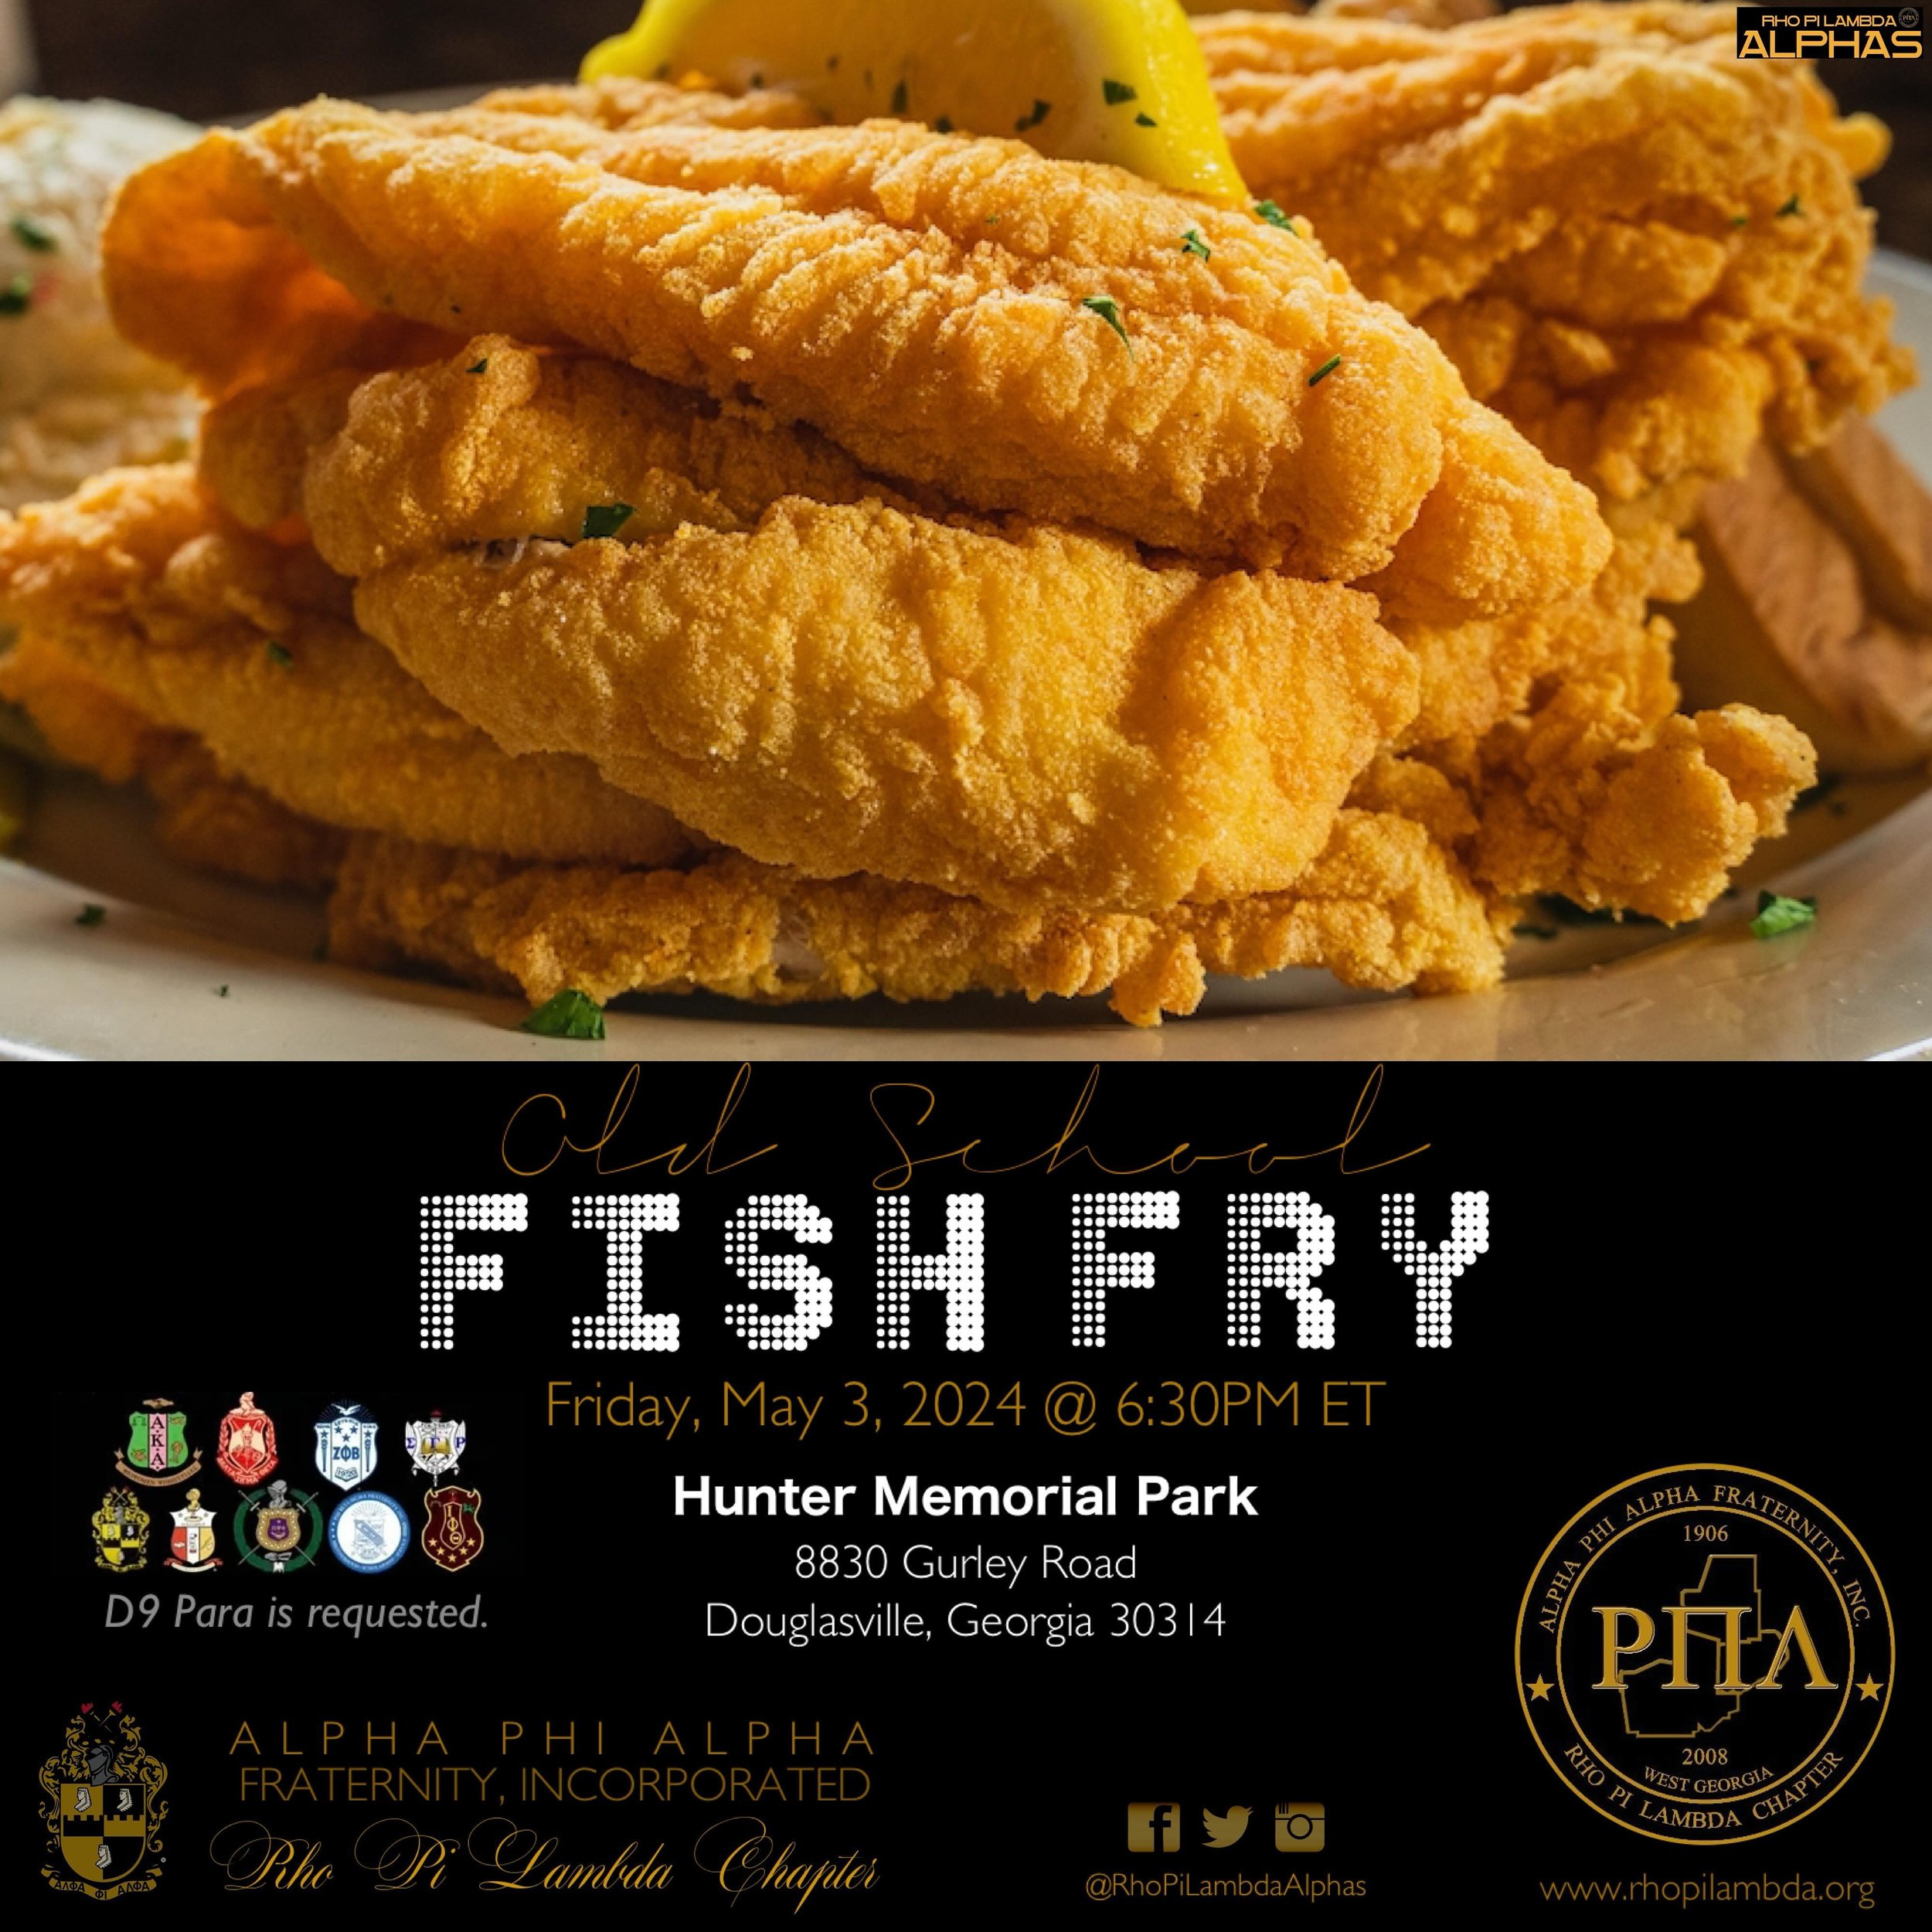 #&Rho;&Pi;&Lambda;FratFridays🤙🏾
____________________________________

Attention members of the Divine Nine who serve Douglas, Carroll, and/or Paulding Counties in Georgia.

The Old School D9 Fish Fry is BAAAACK!!!! 😎 

The Rho Pi Lambda Alphas inv